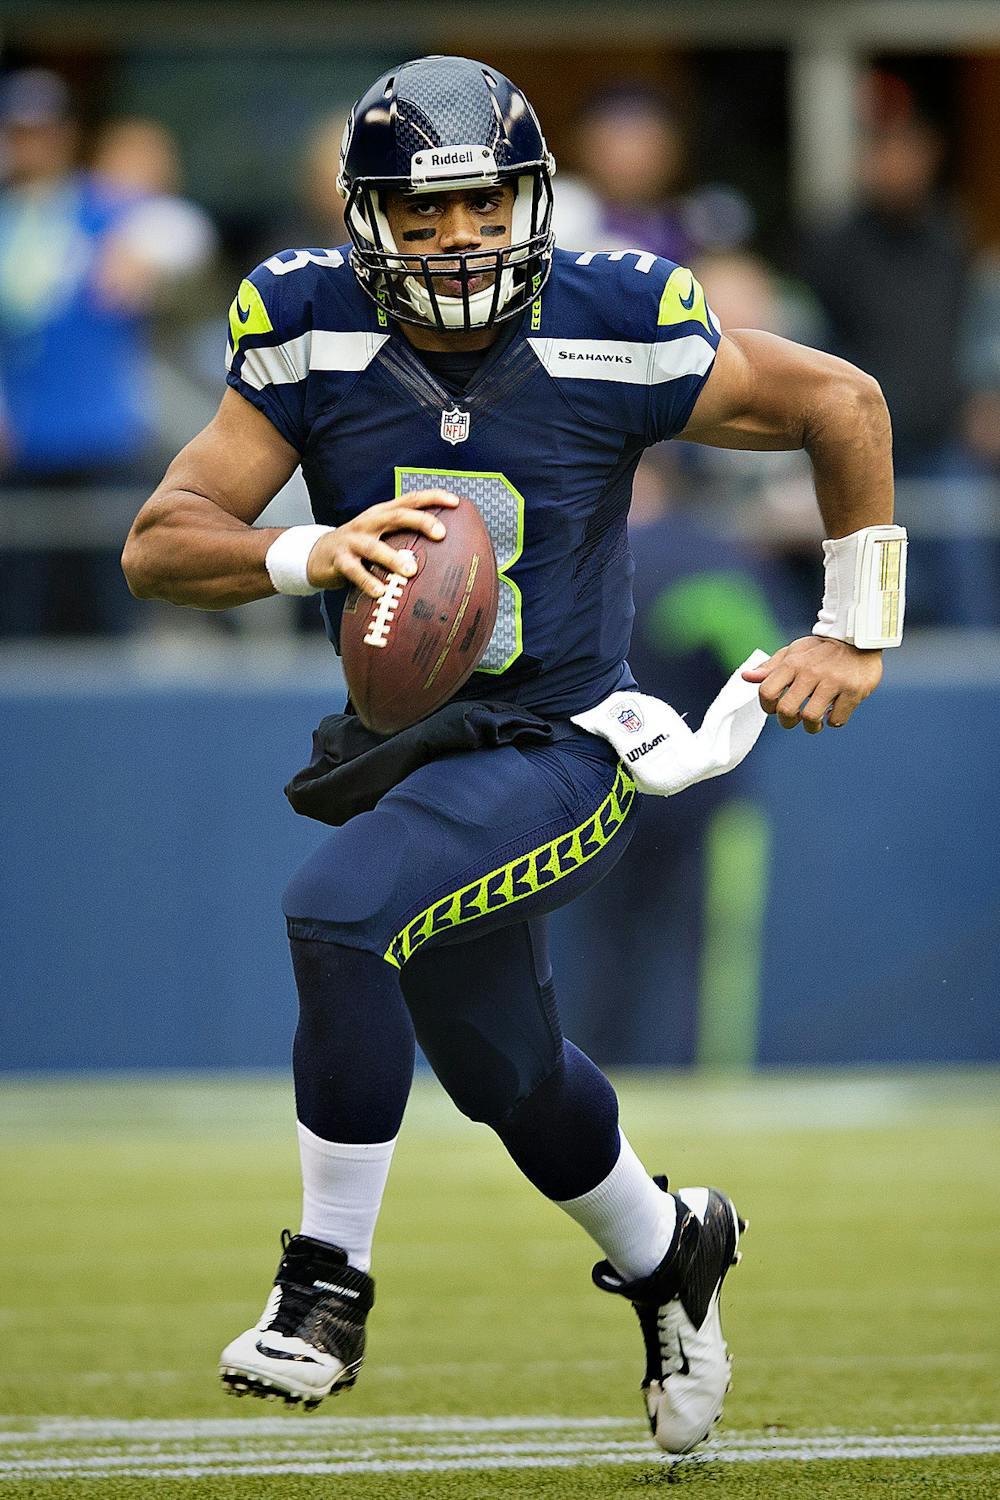 CC BY 2.0/Larry Maurer
Russell Wilson is one of the quarterbacks who expressed mild disinterest in his situation during the offseason.